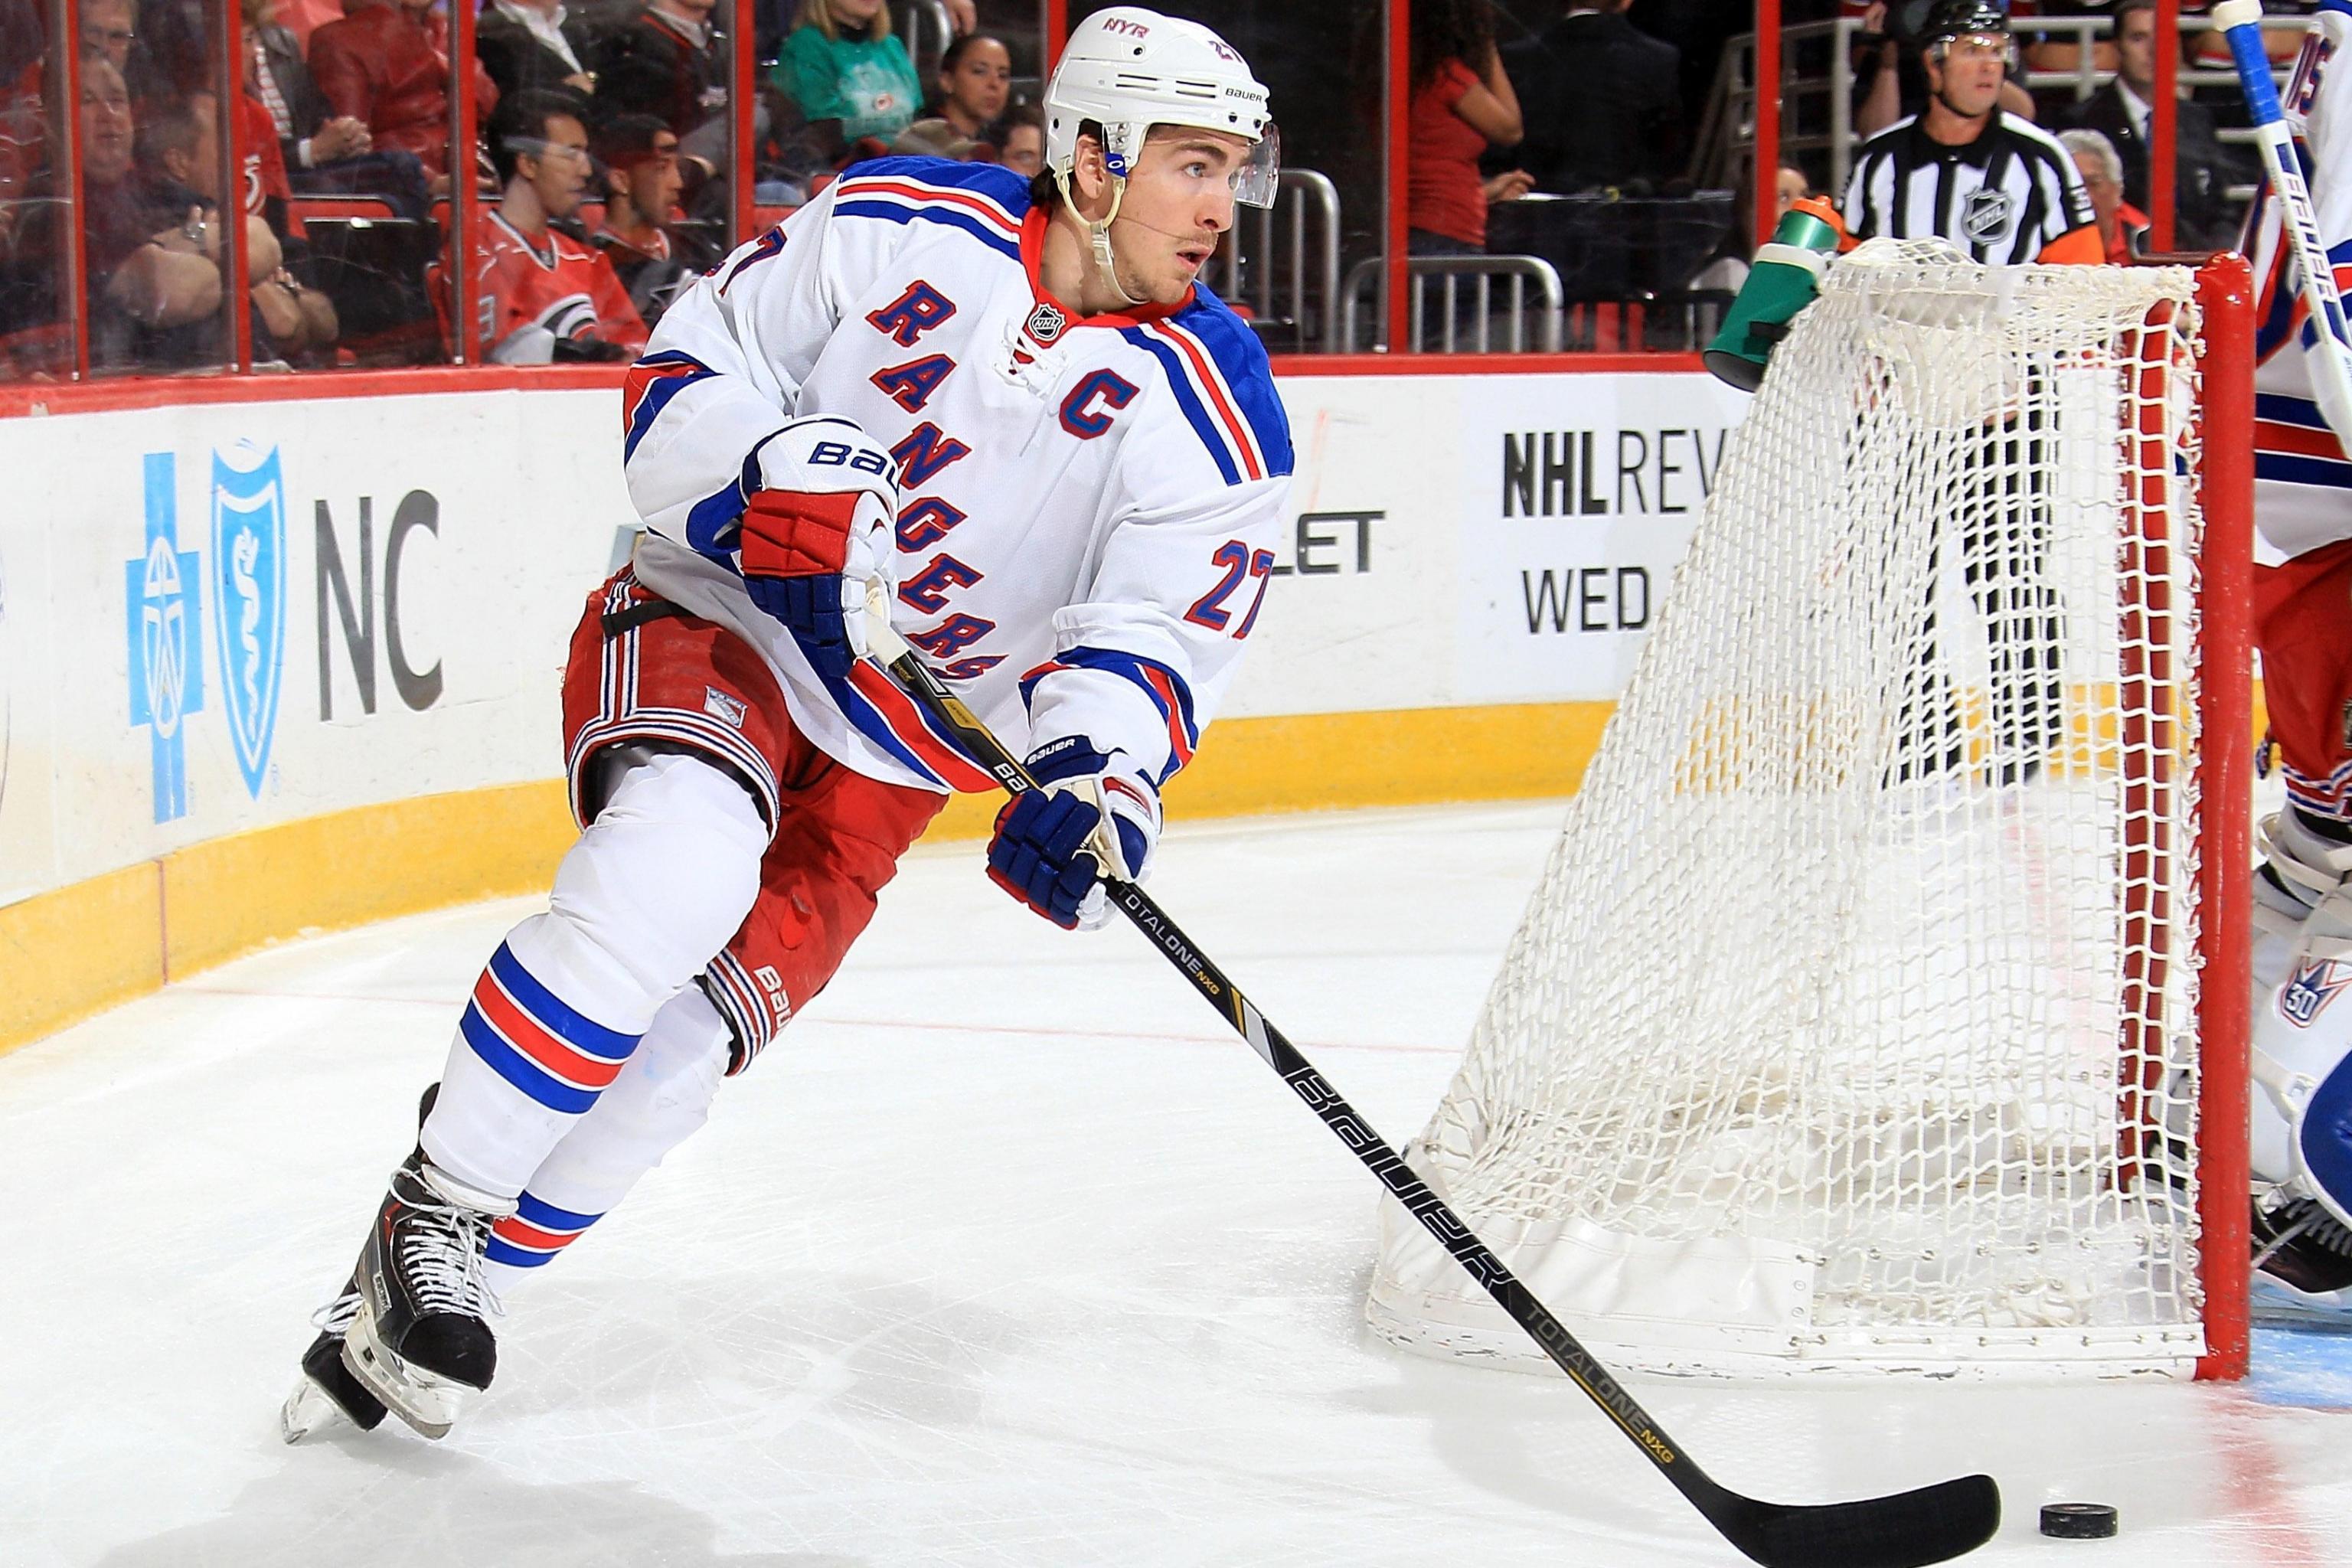 NHL -- New York Rangers' Ryan McDonagh is old school at a young